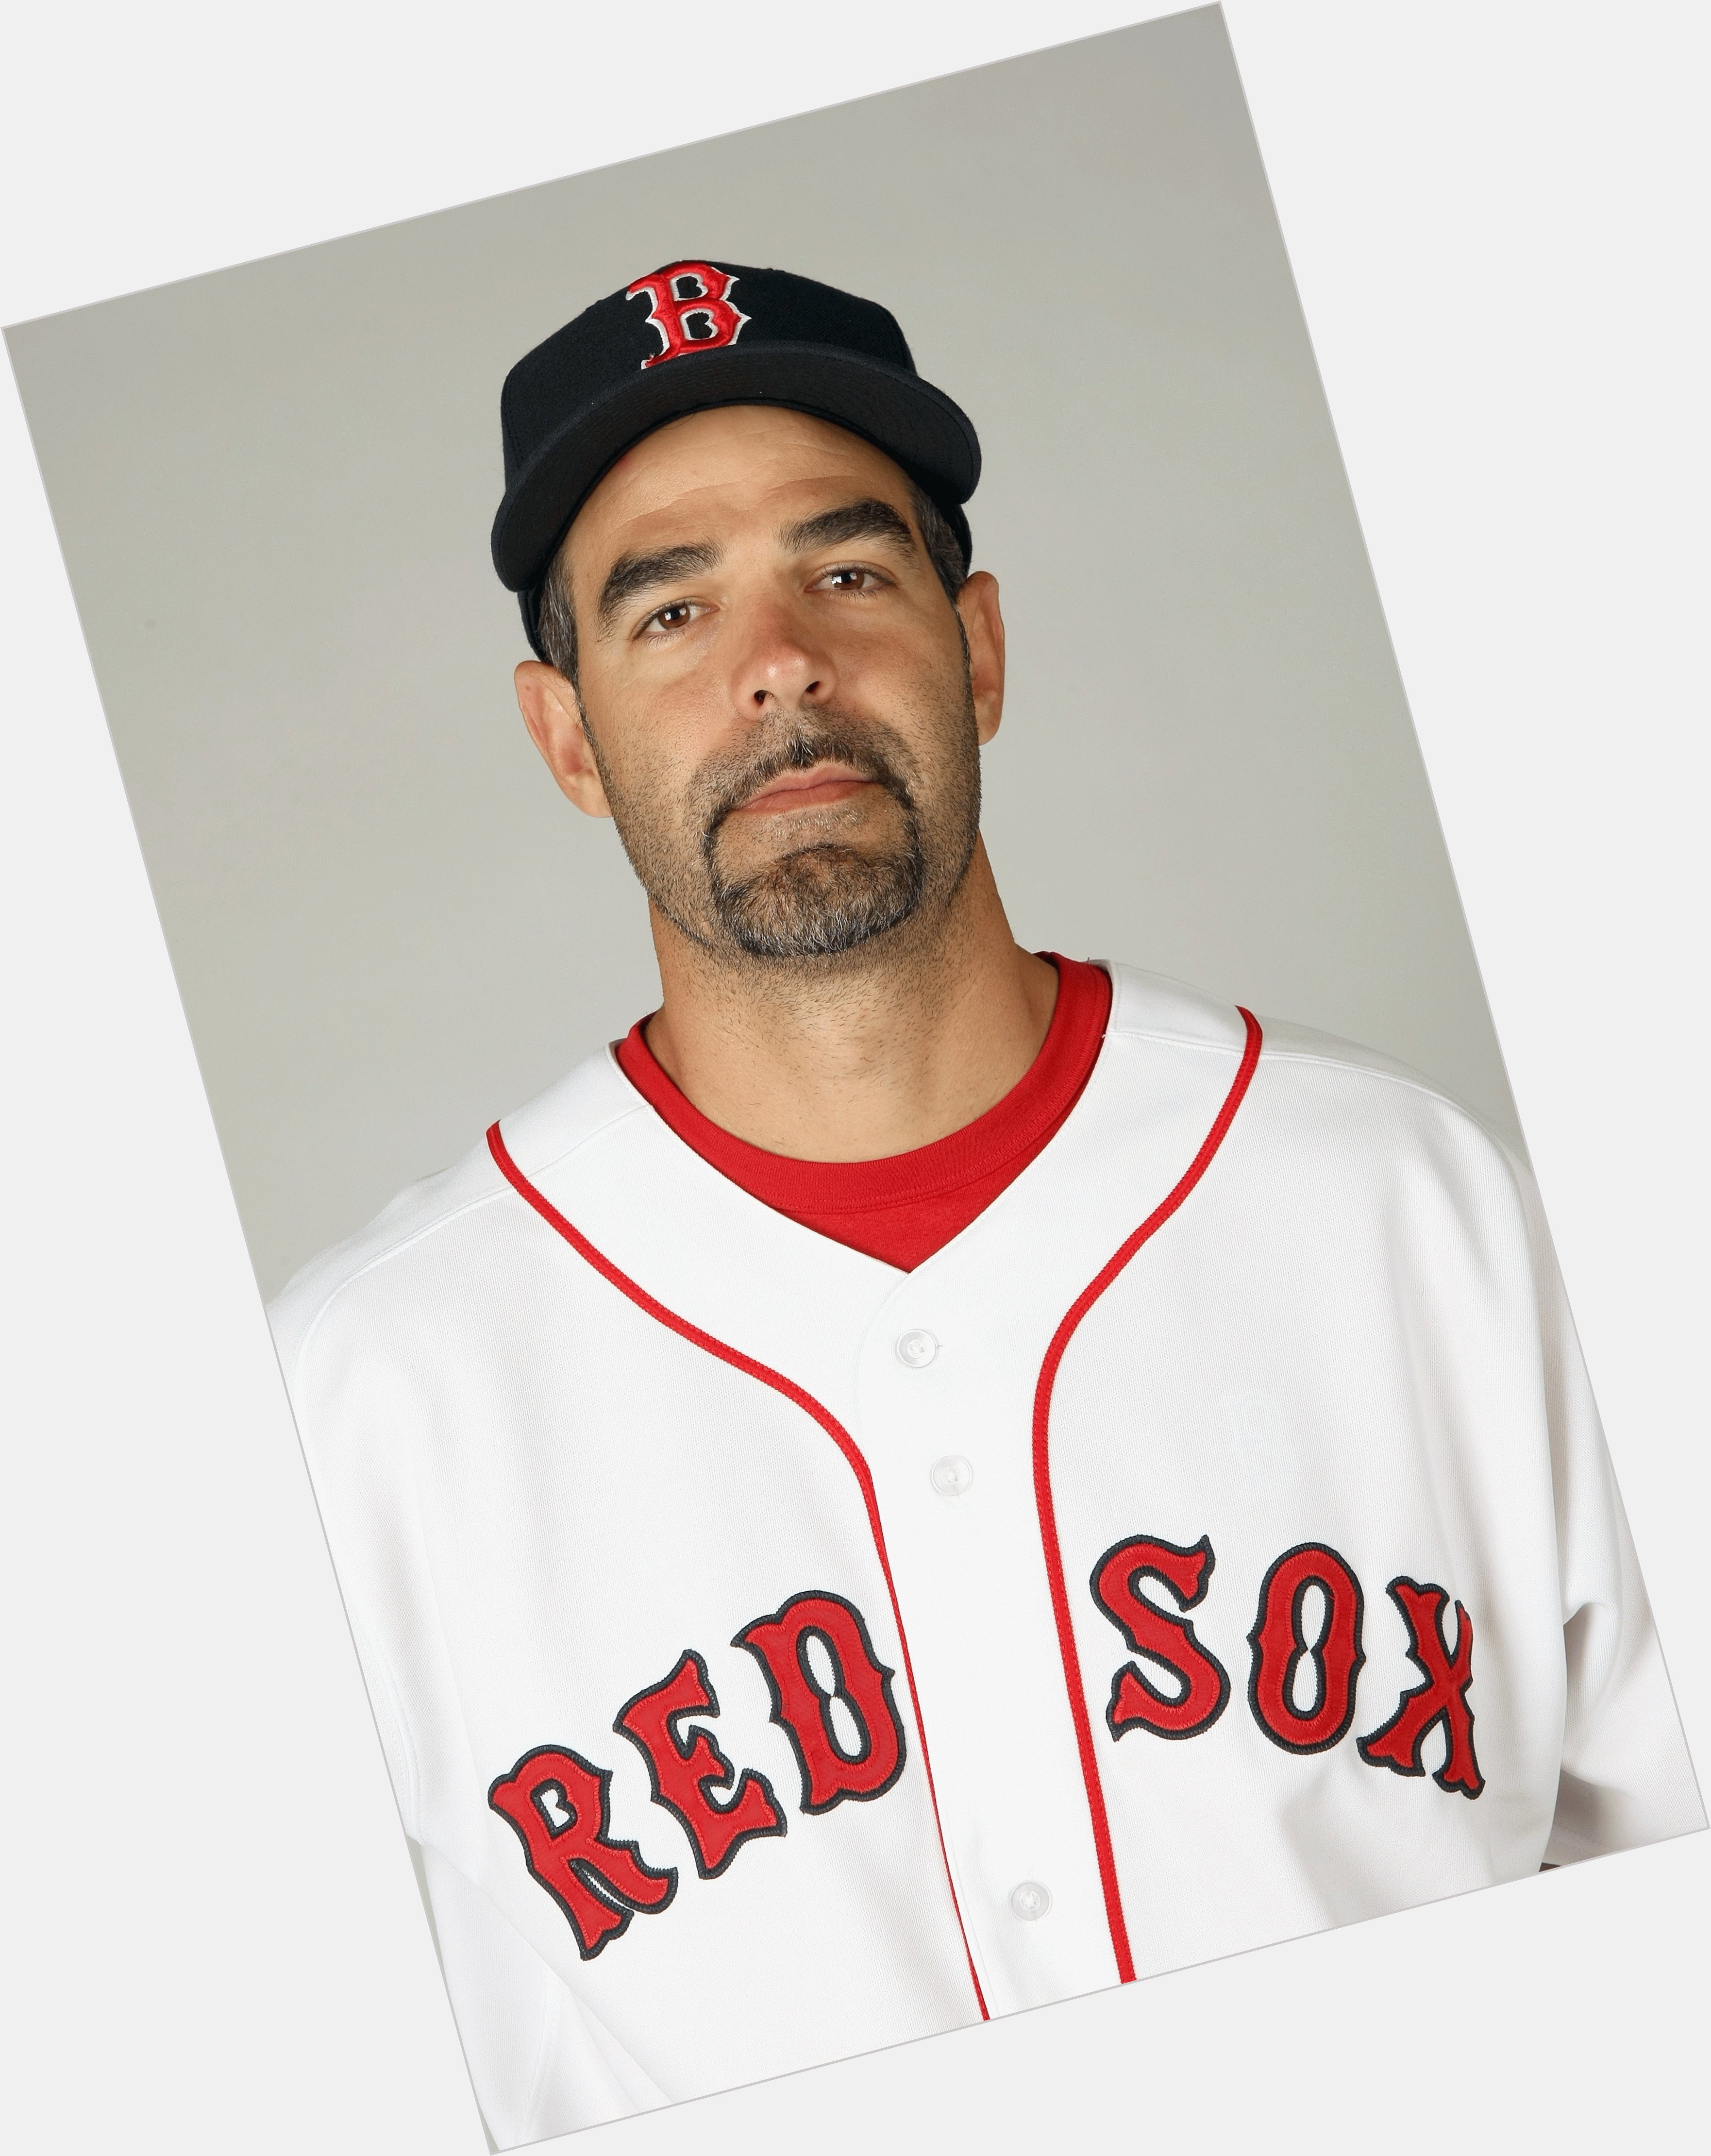 Mike Lowell birthday 2015